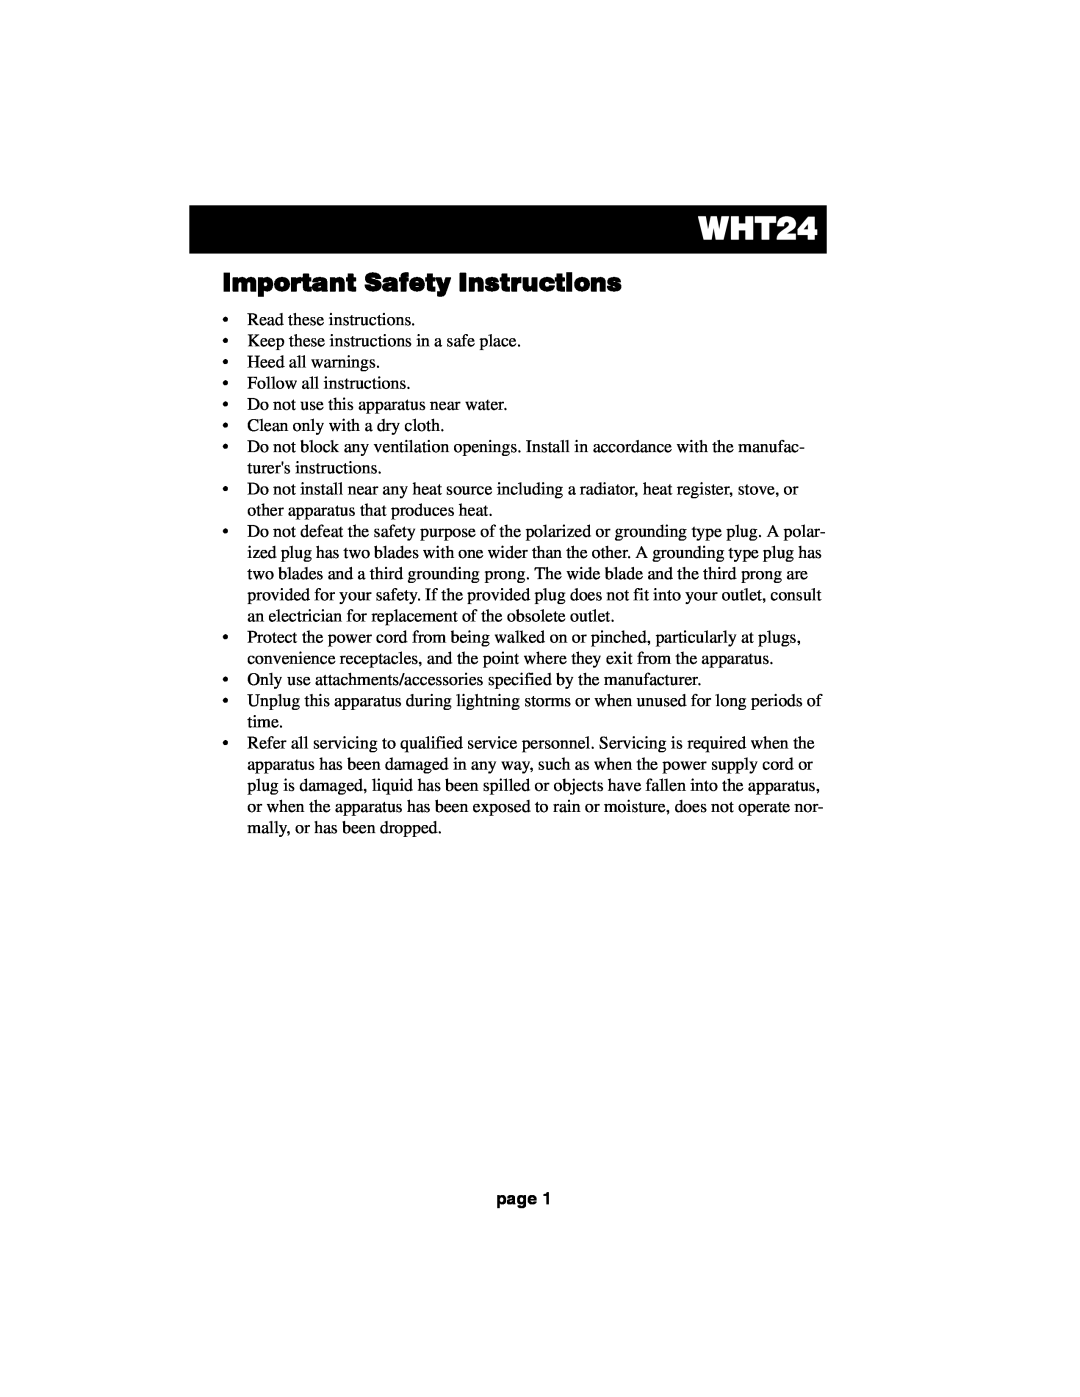 Acoustic Research HT60 operation manual WHT24, Important Safety Instructions, page 